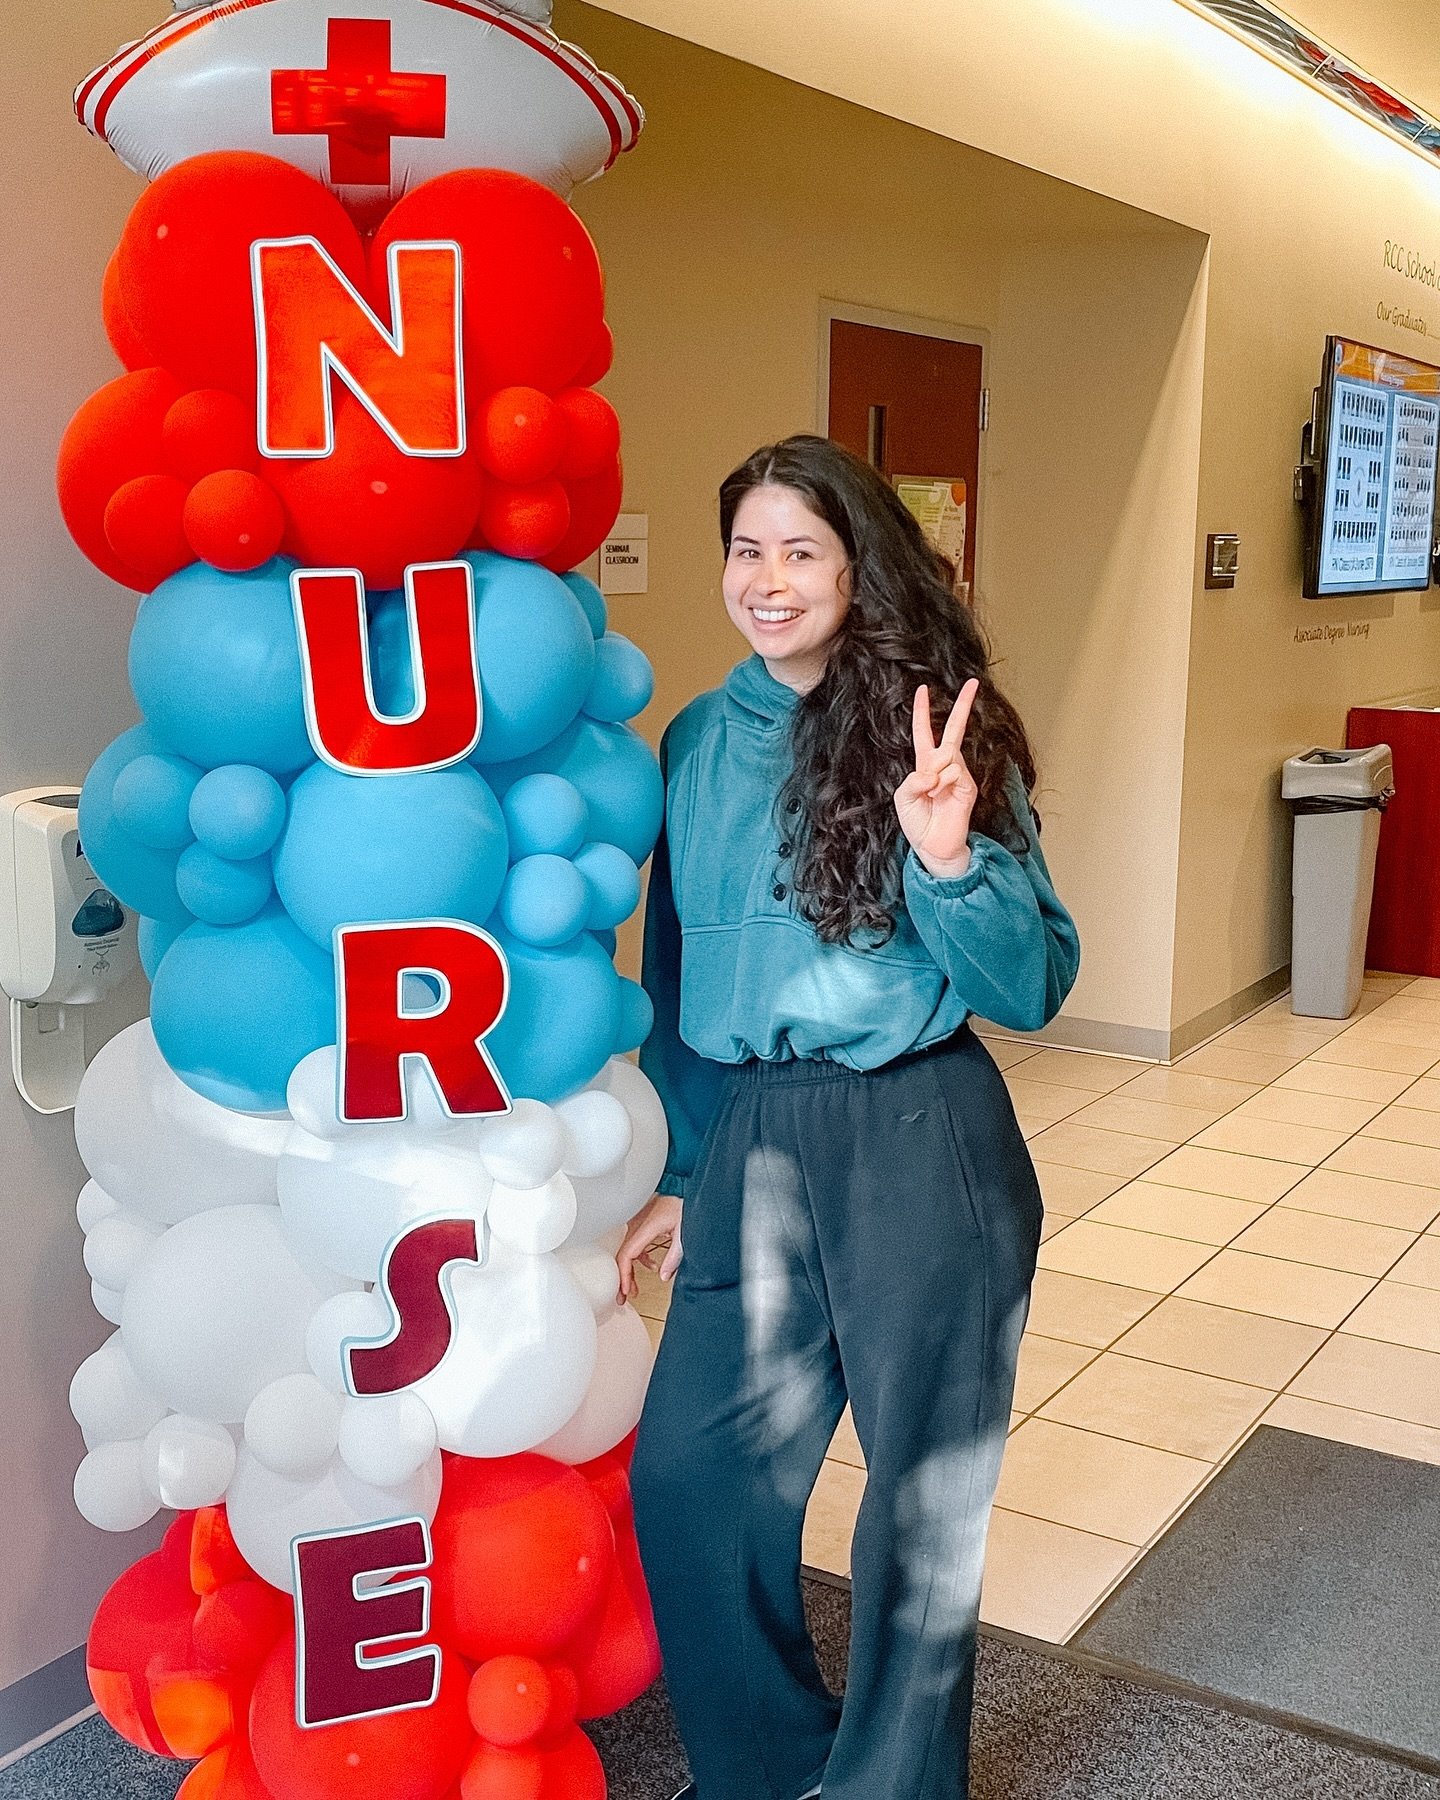 Julisa came to our program with the dream of getting software to help prepare her for the testing required to become a Registered Nurse.&nbsp;Thanks to a generous donor, that dream was fulfilled, making nursing her reality!

This week, she sent over 